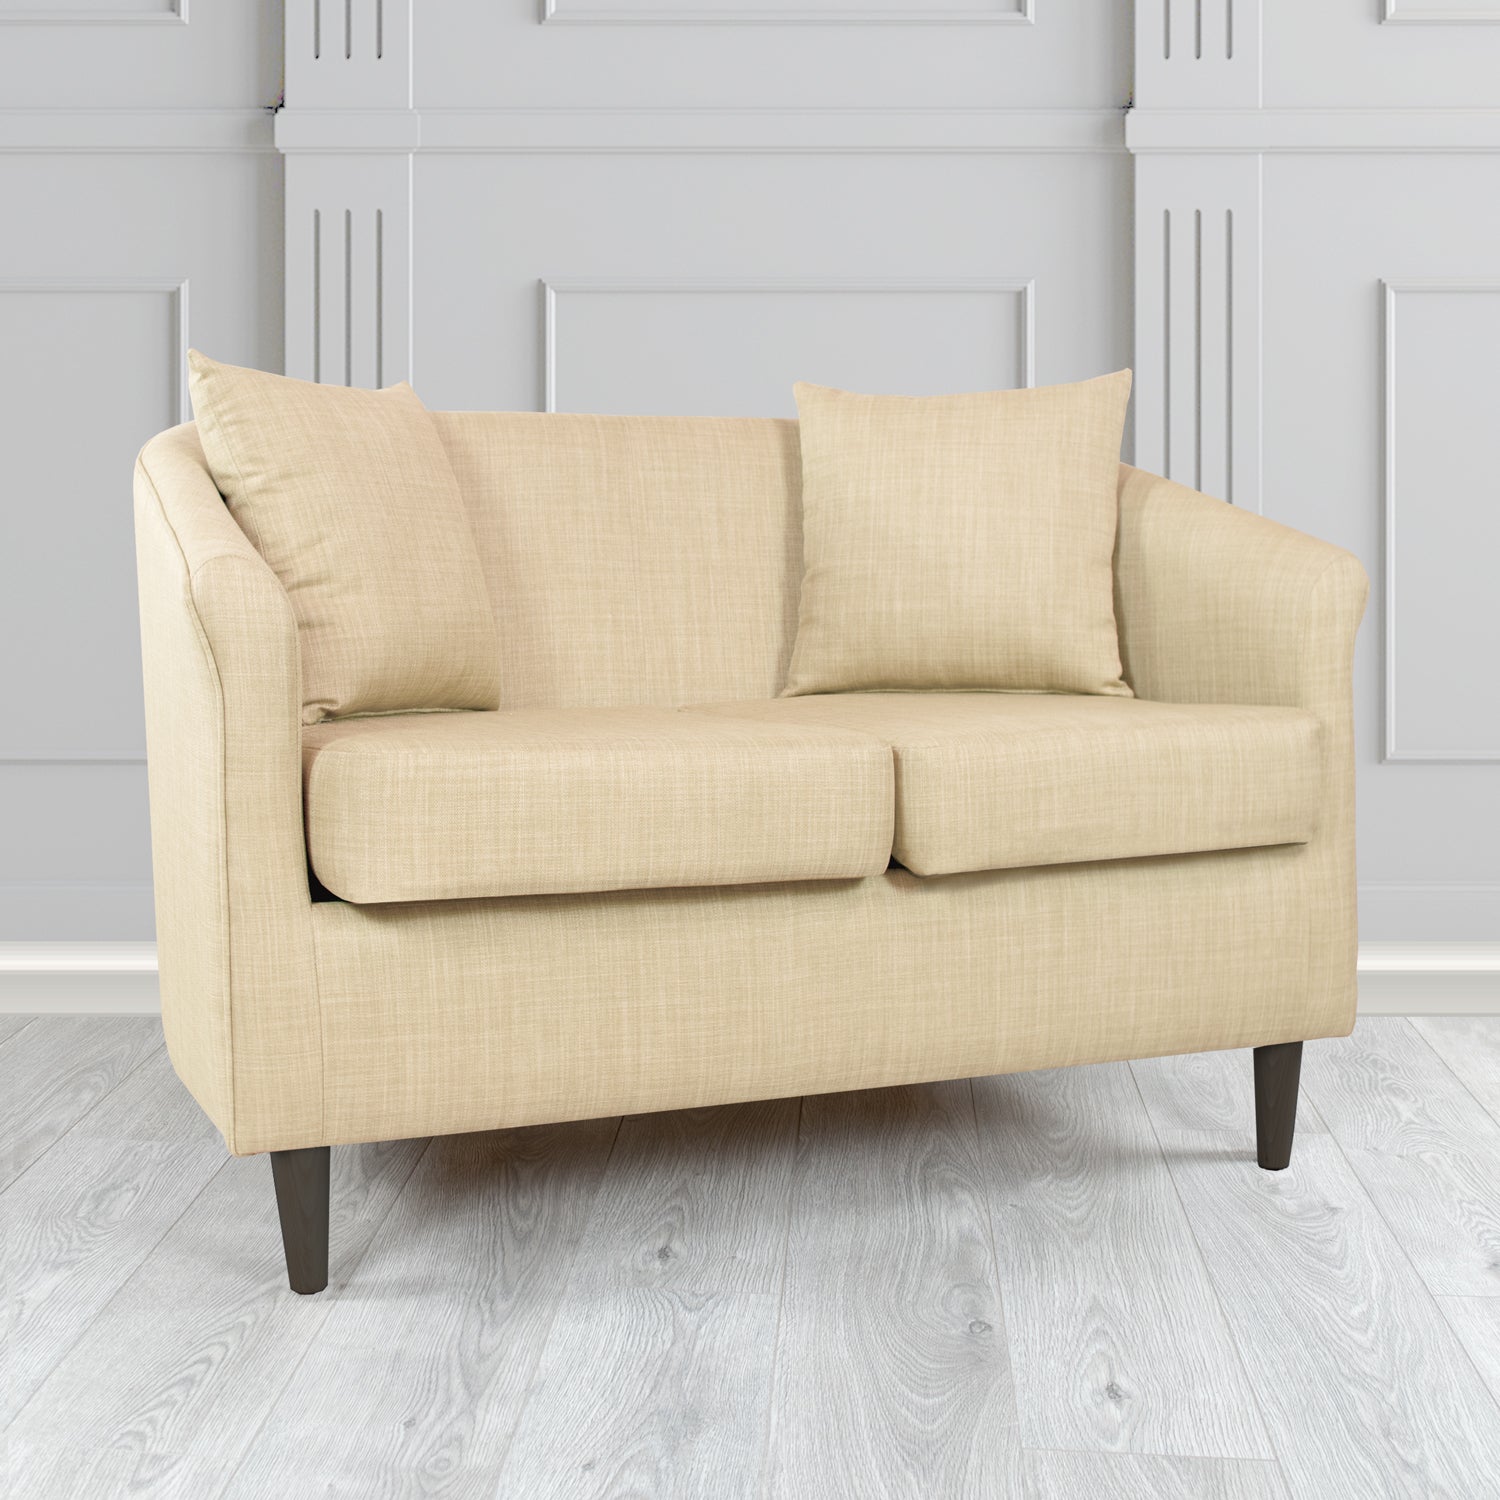 St Tropez Charles Pearl Plain Linen Fabric 2 Seater Tub Sofa with Scatter Cushions - The Tub Chair Shop